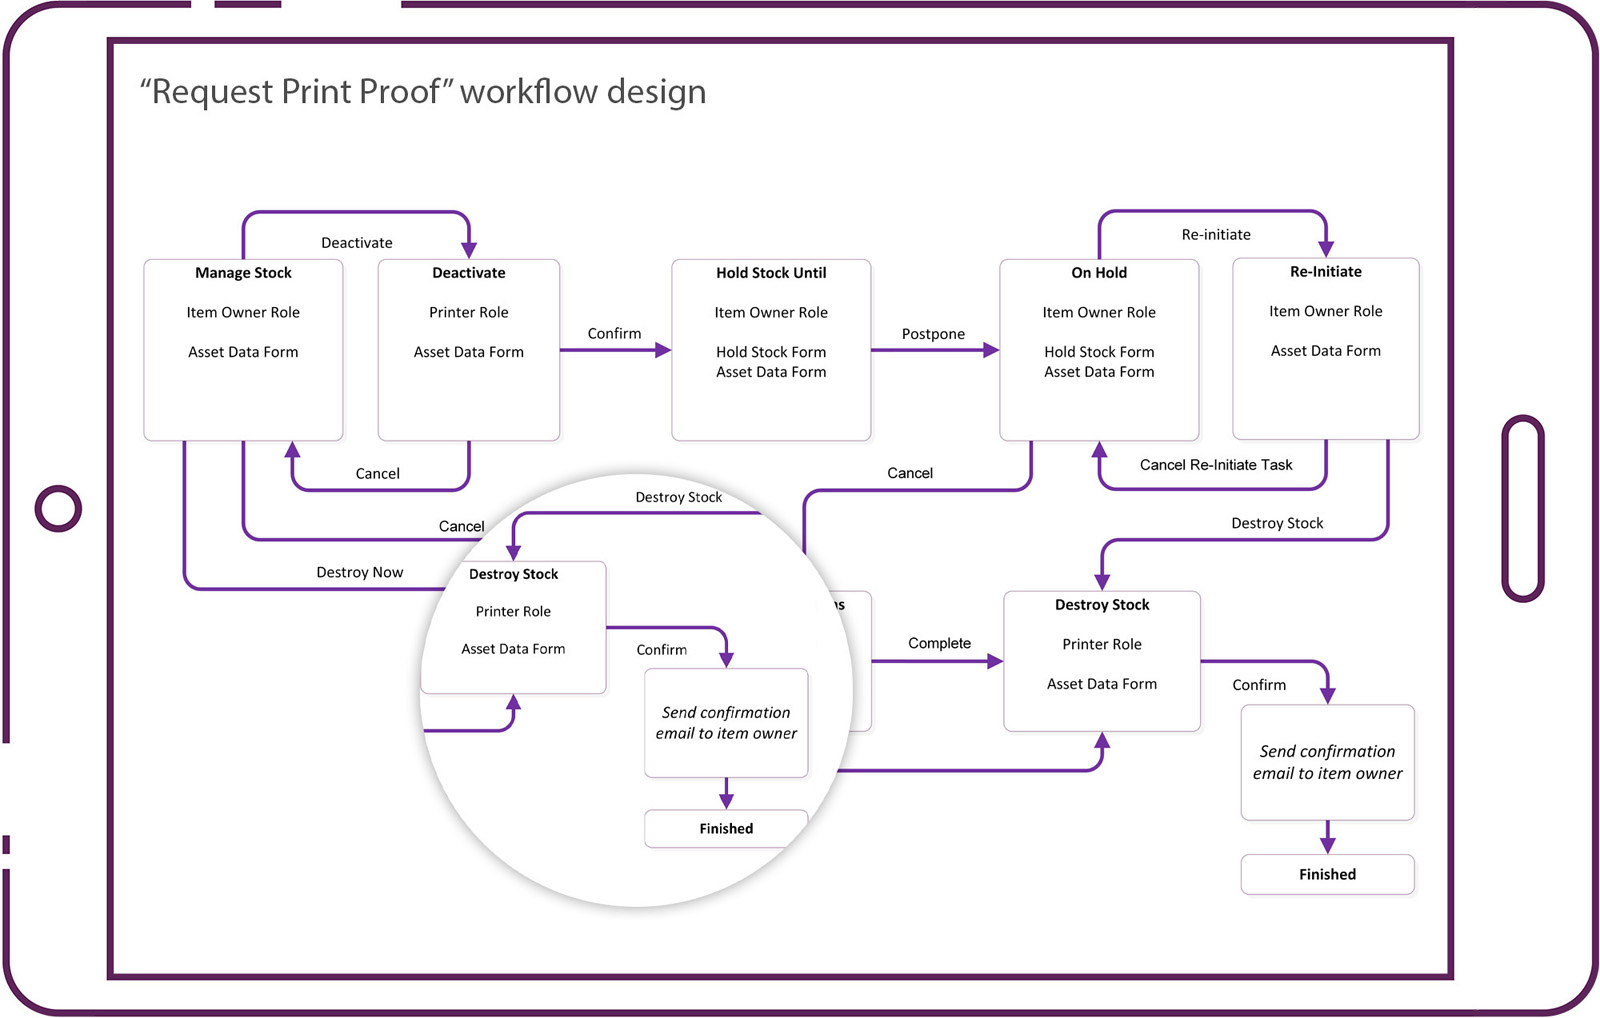 Diagram showing the workflow capabilities of the bethebrand system